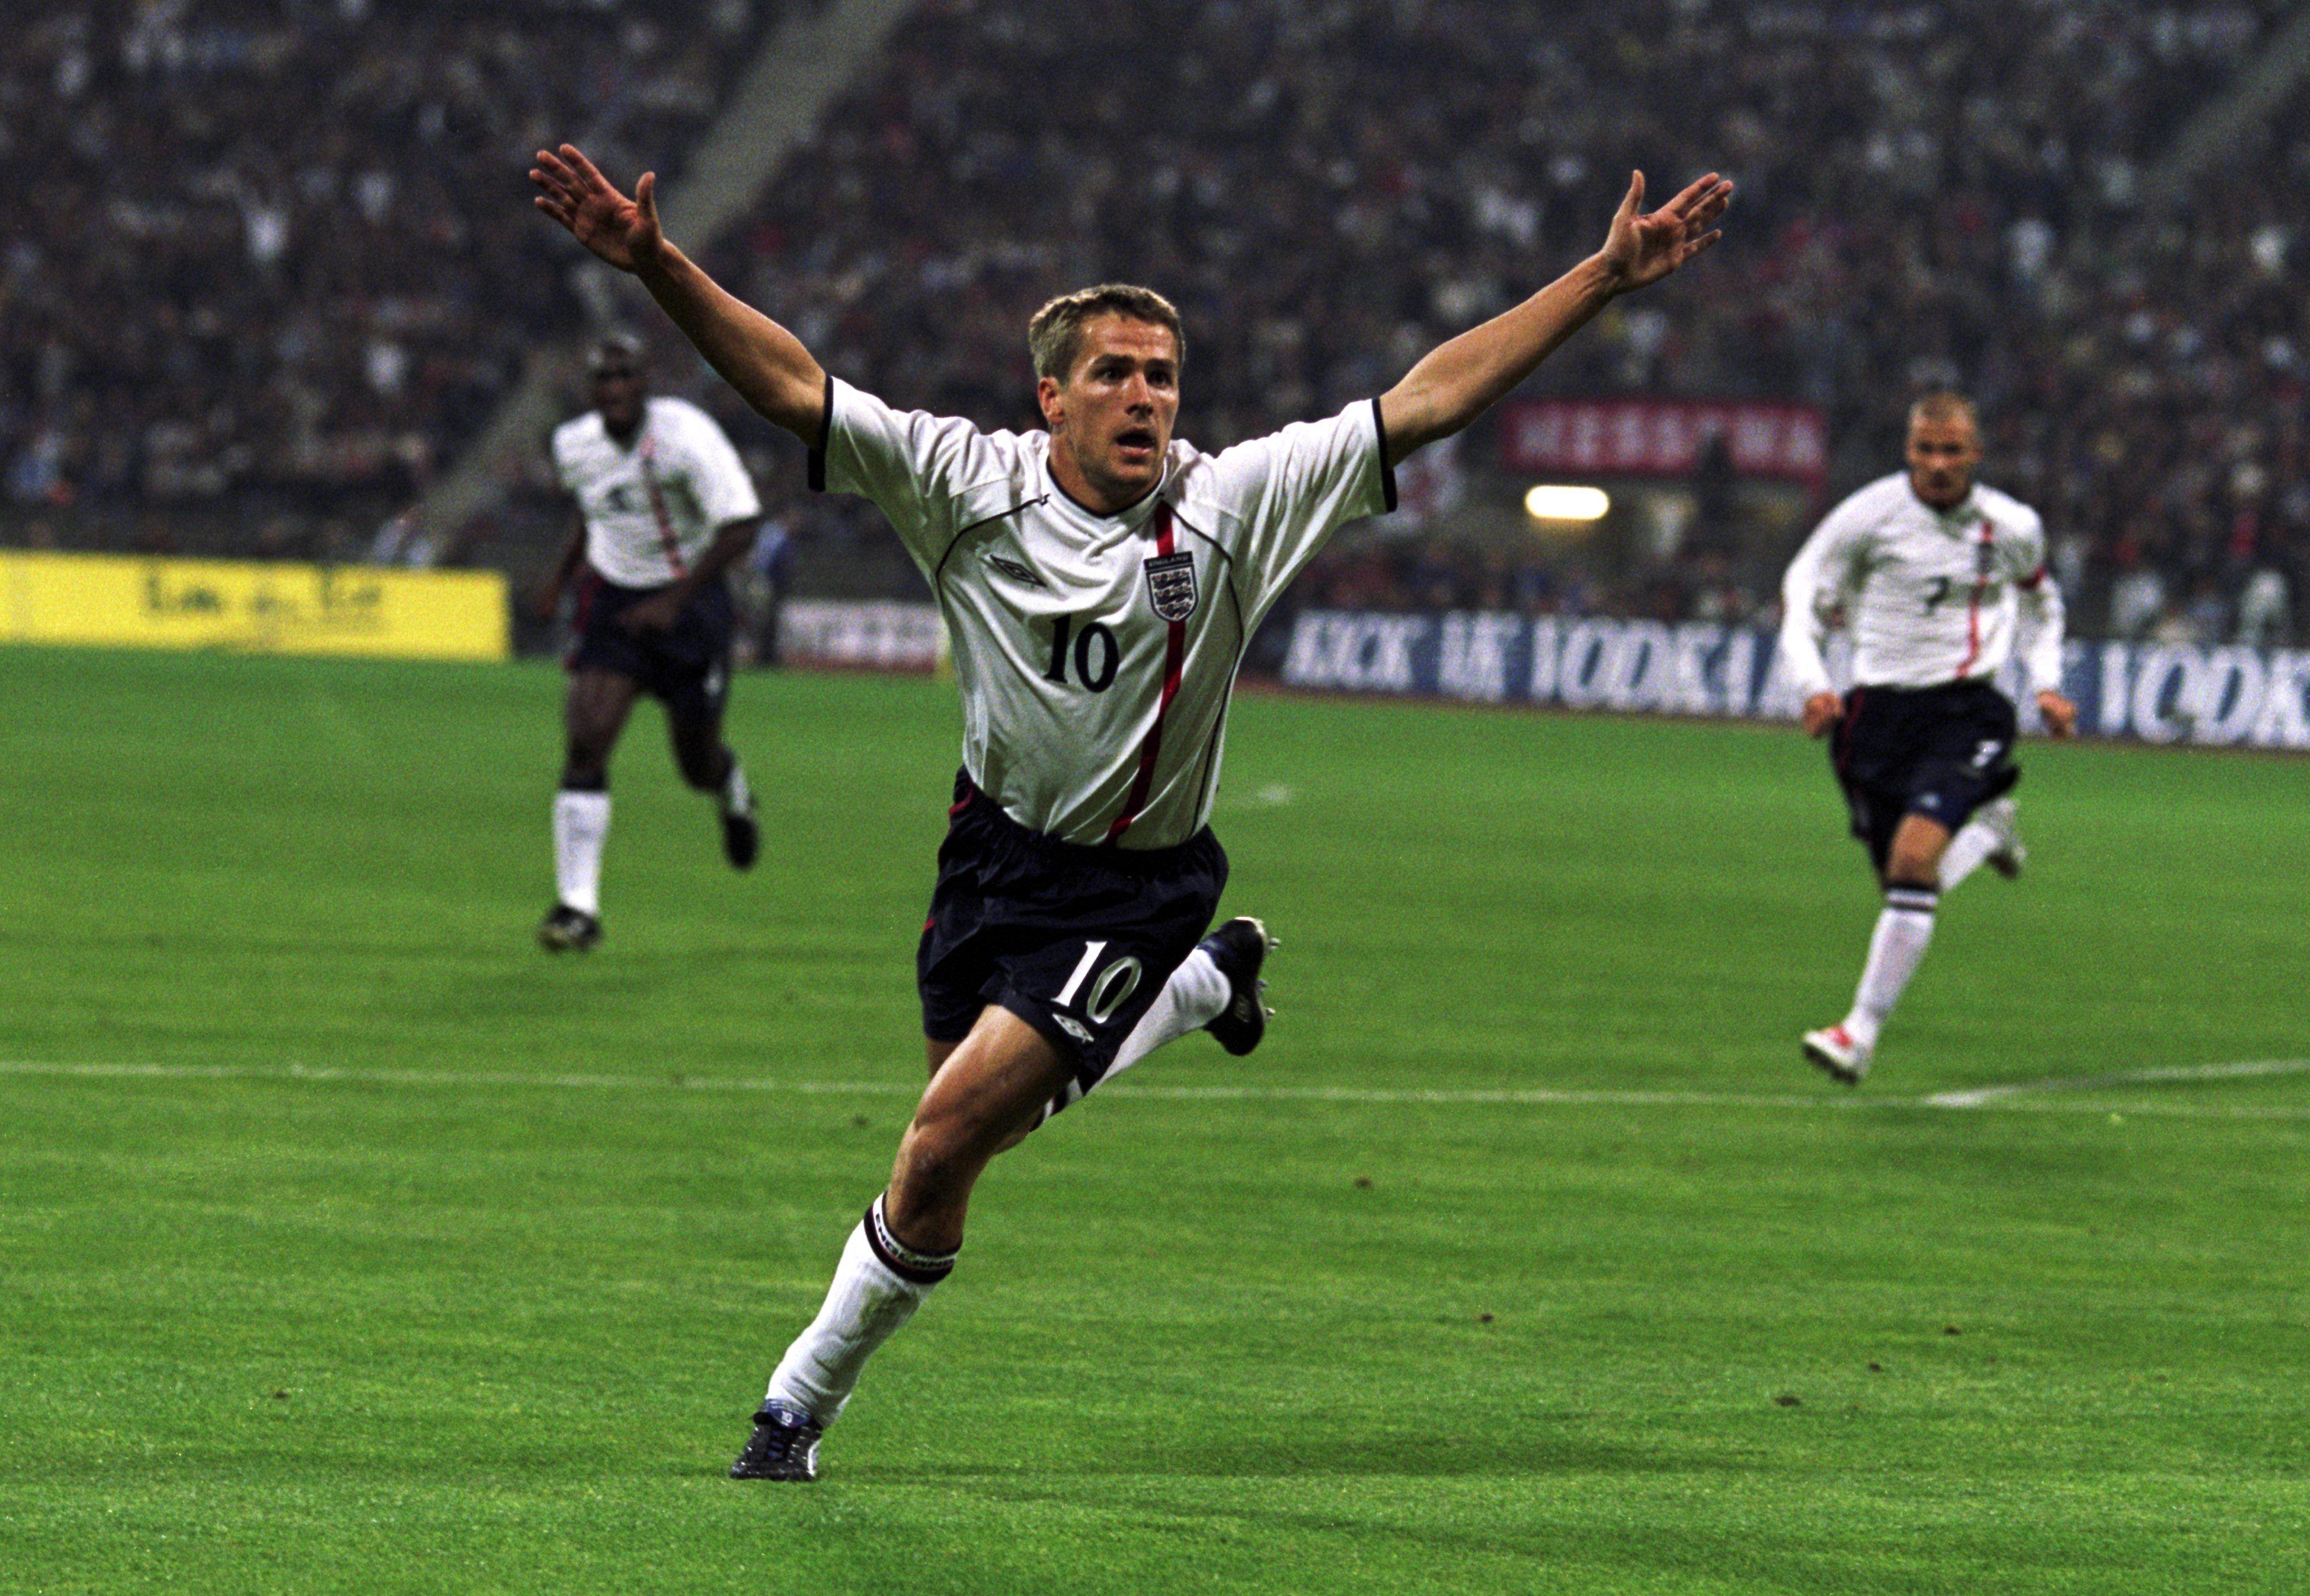 Michael Owen of England celebrates after scoring a goal during the FIFA 2002 World Cup Qualifier against Germany